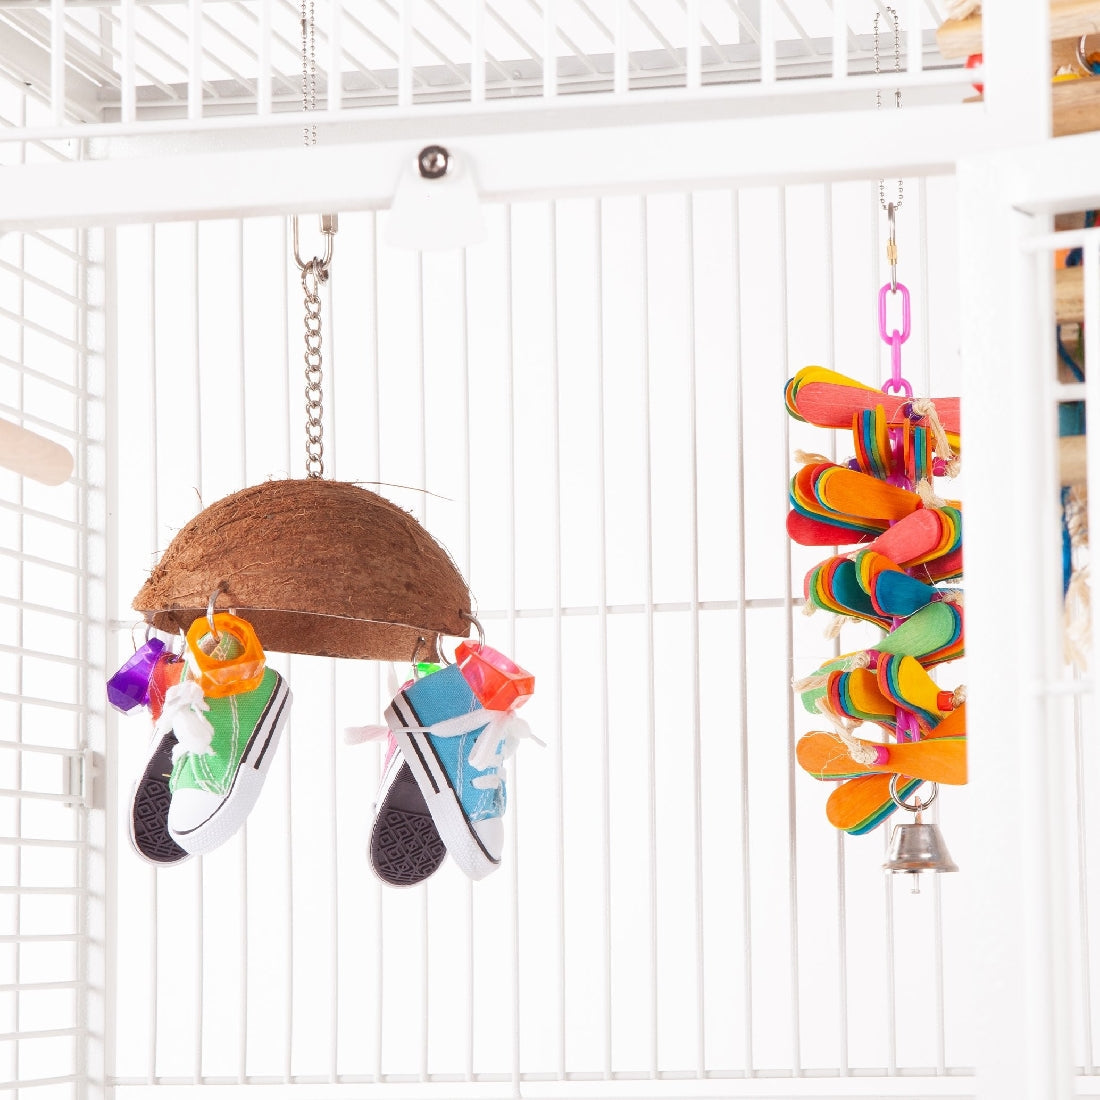 Colorful bird toys hanging inside a white cage, type: bird toy.